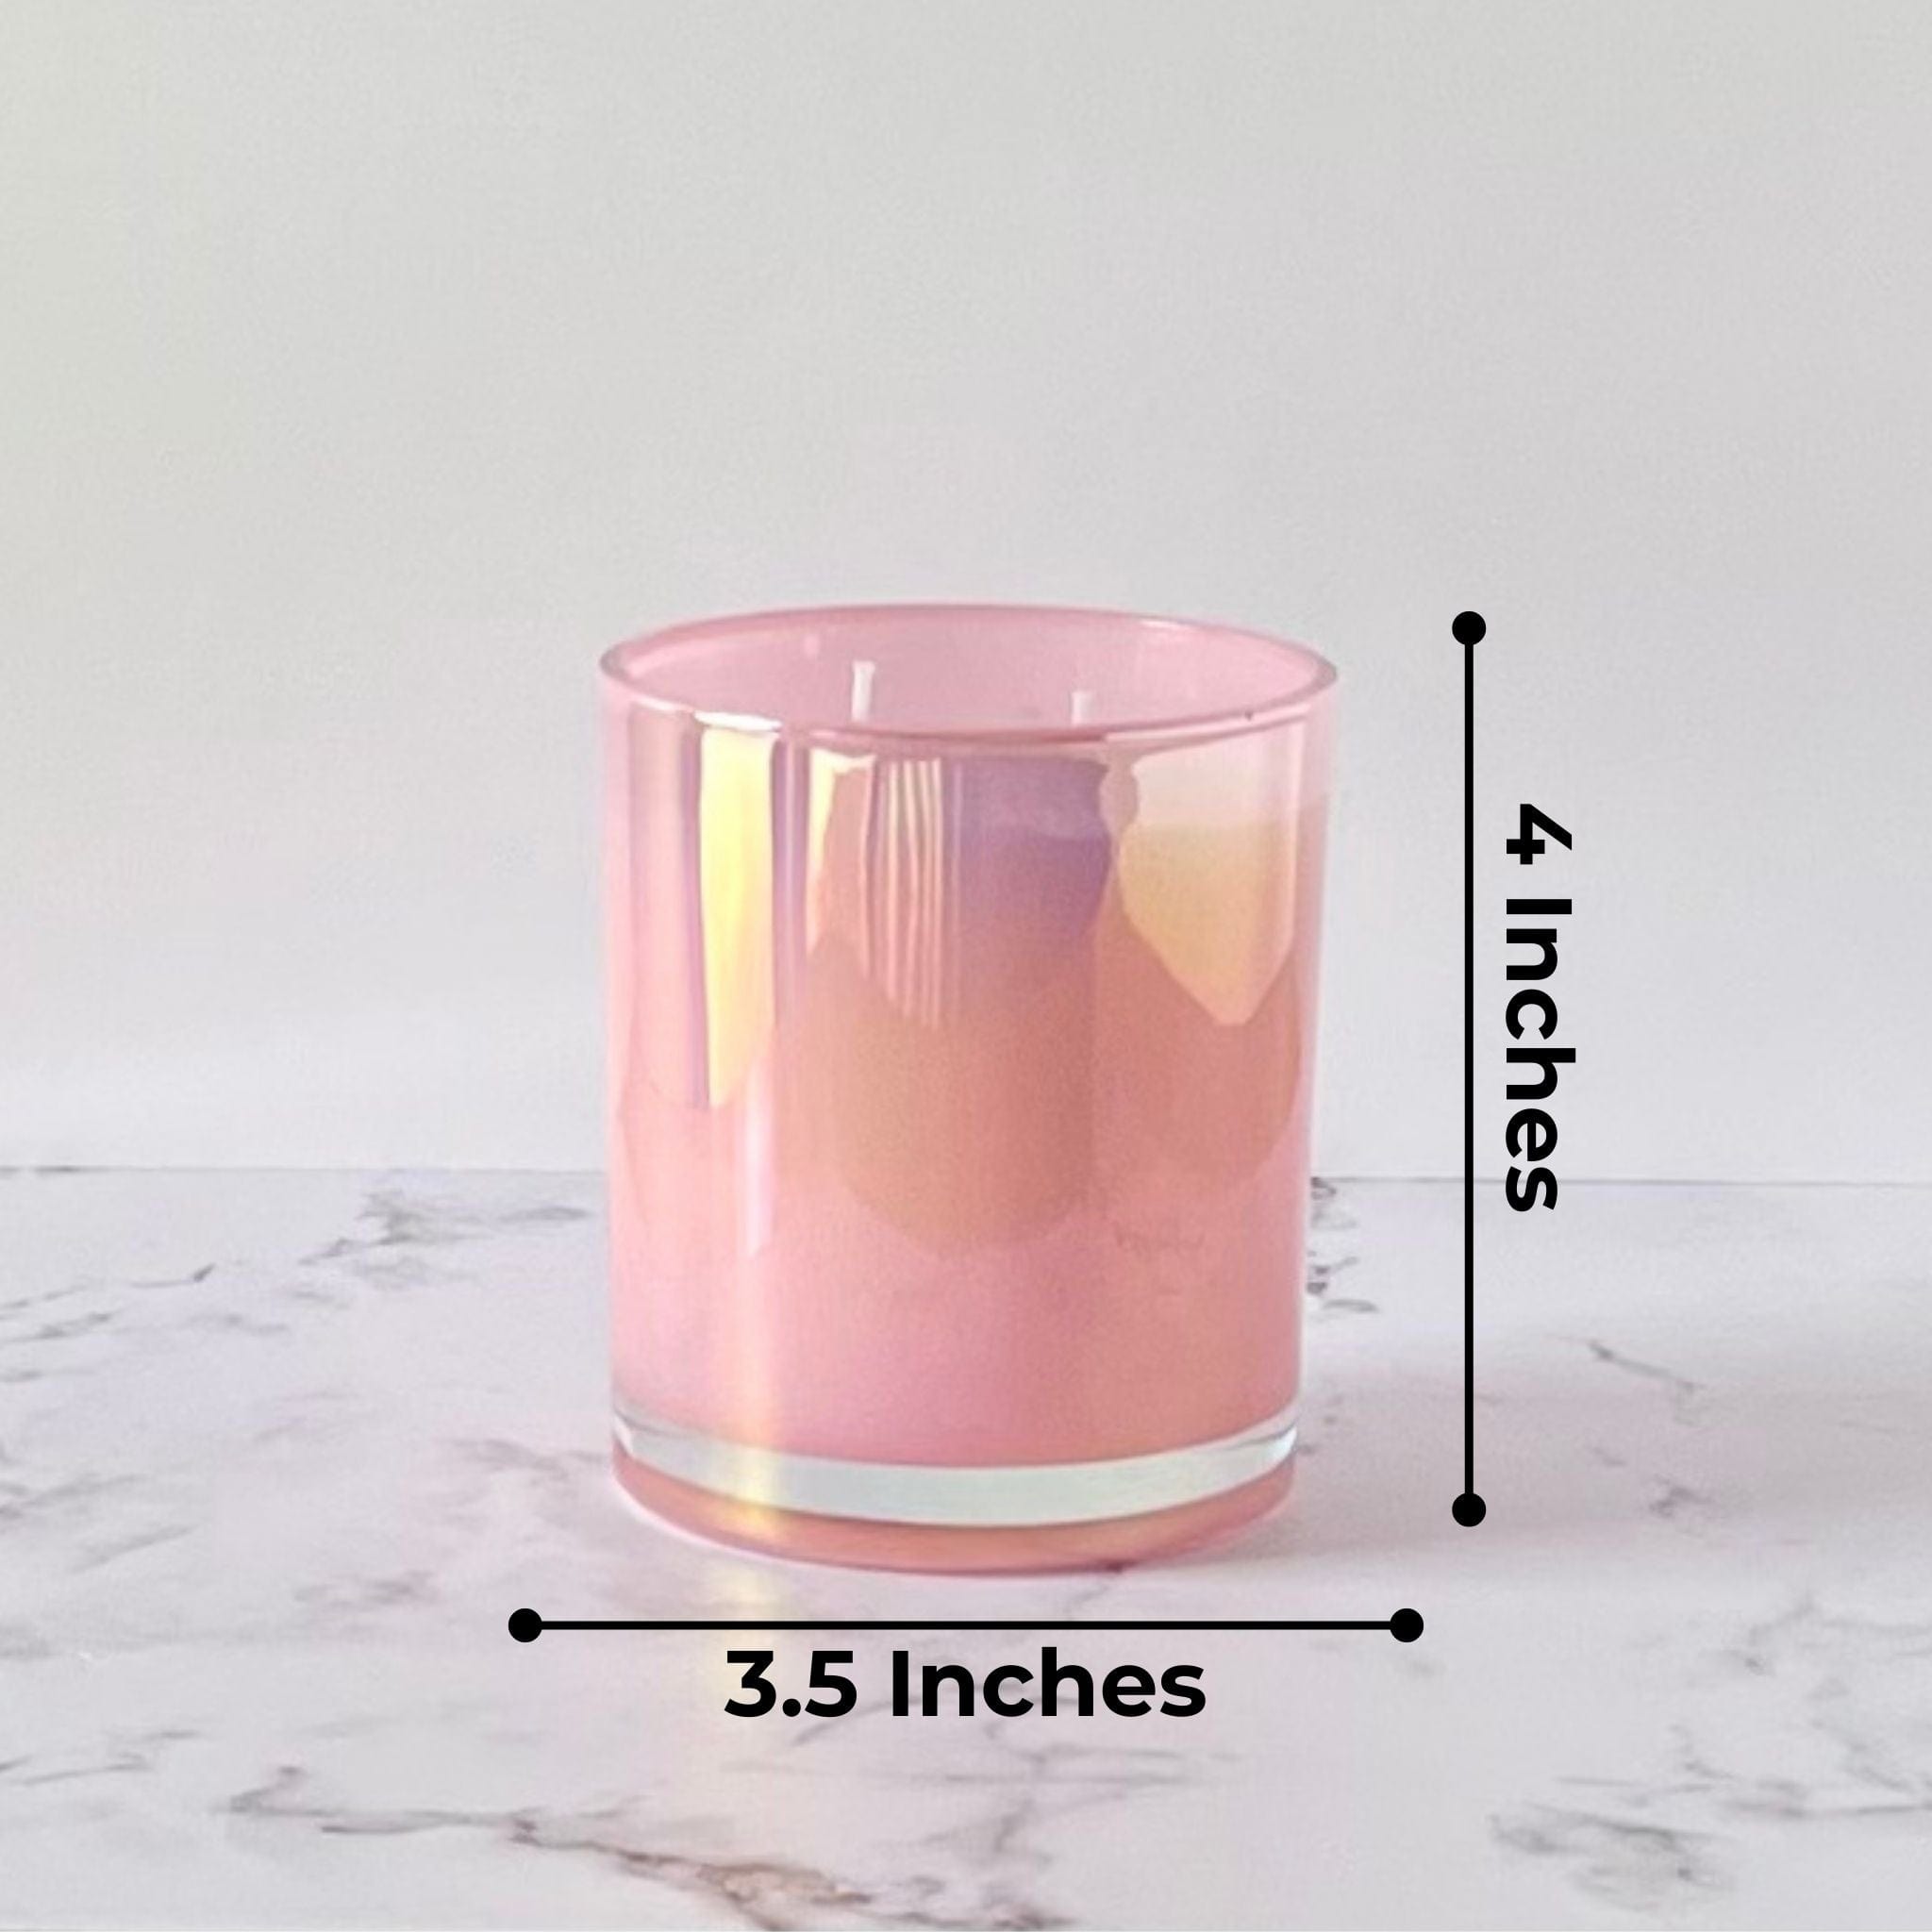 Private Label Candles by Velavida Candles 14 Oz Pink Iridescent Candle (12 Candles)